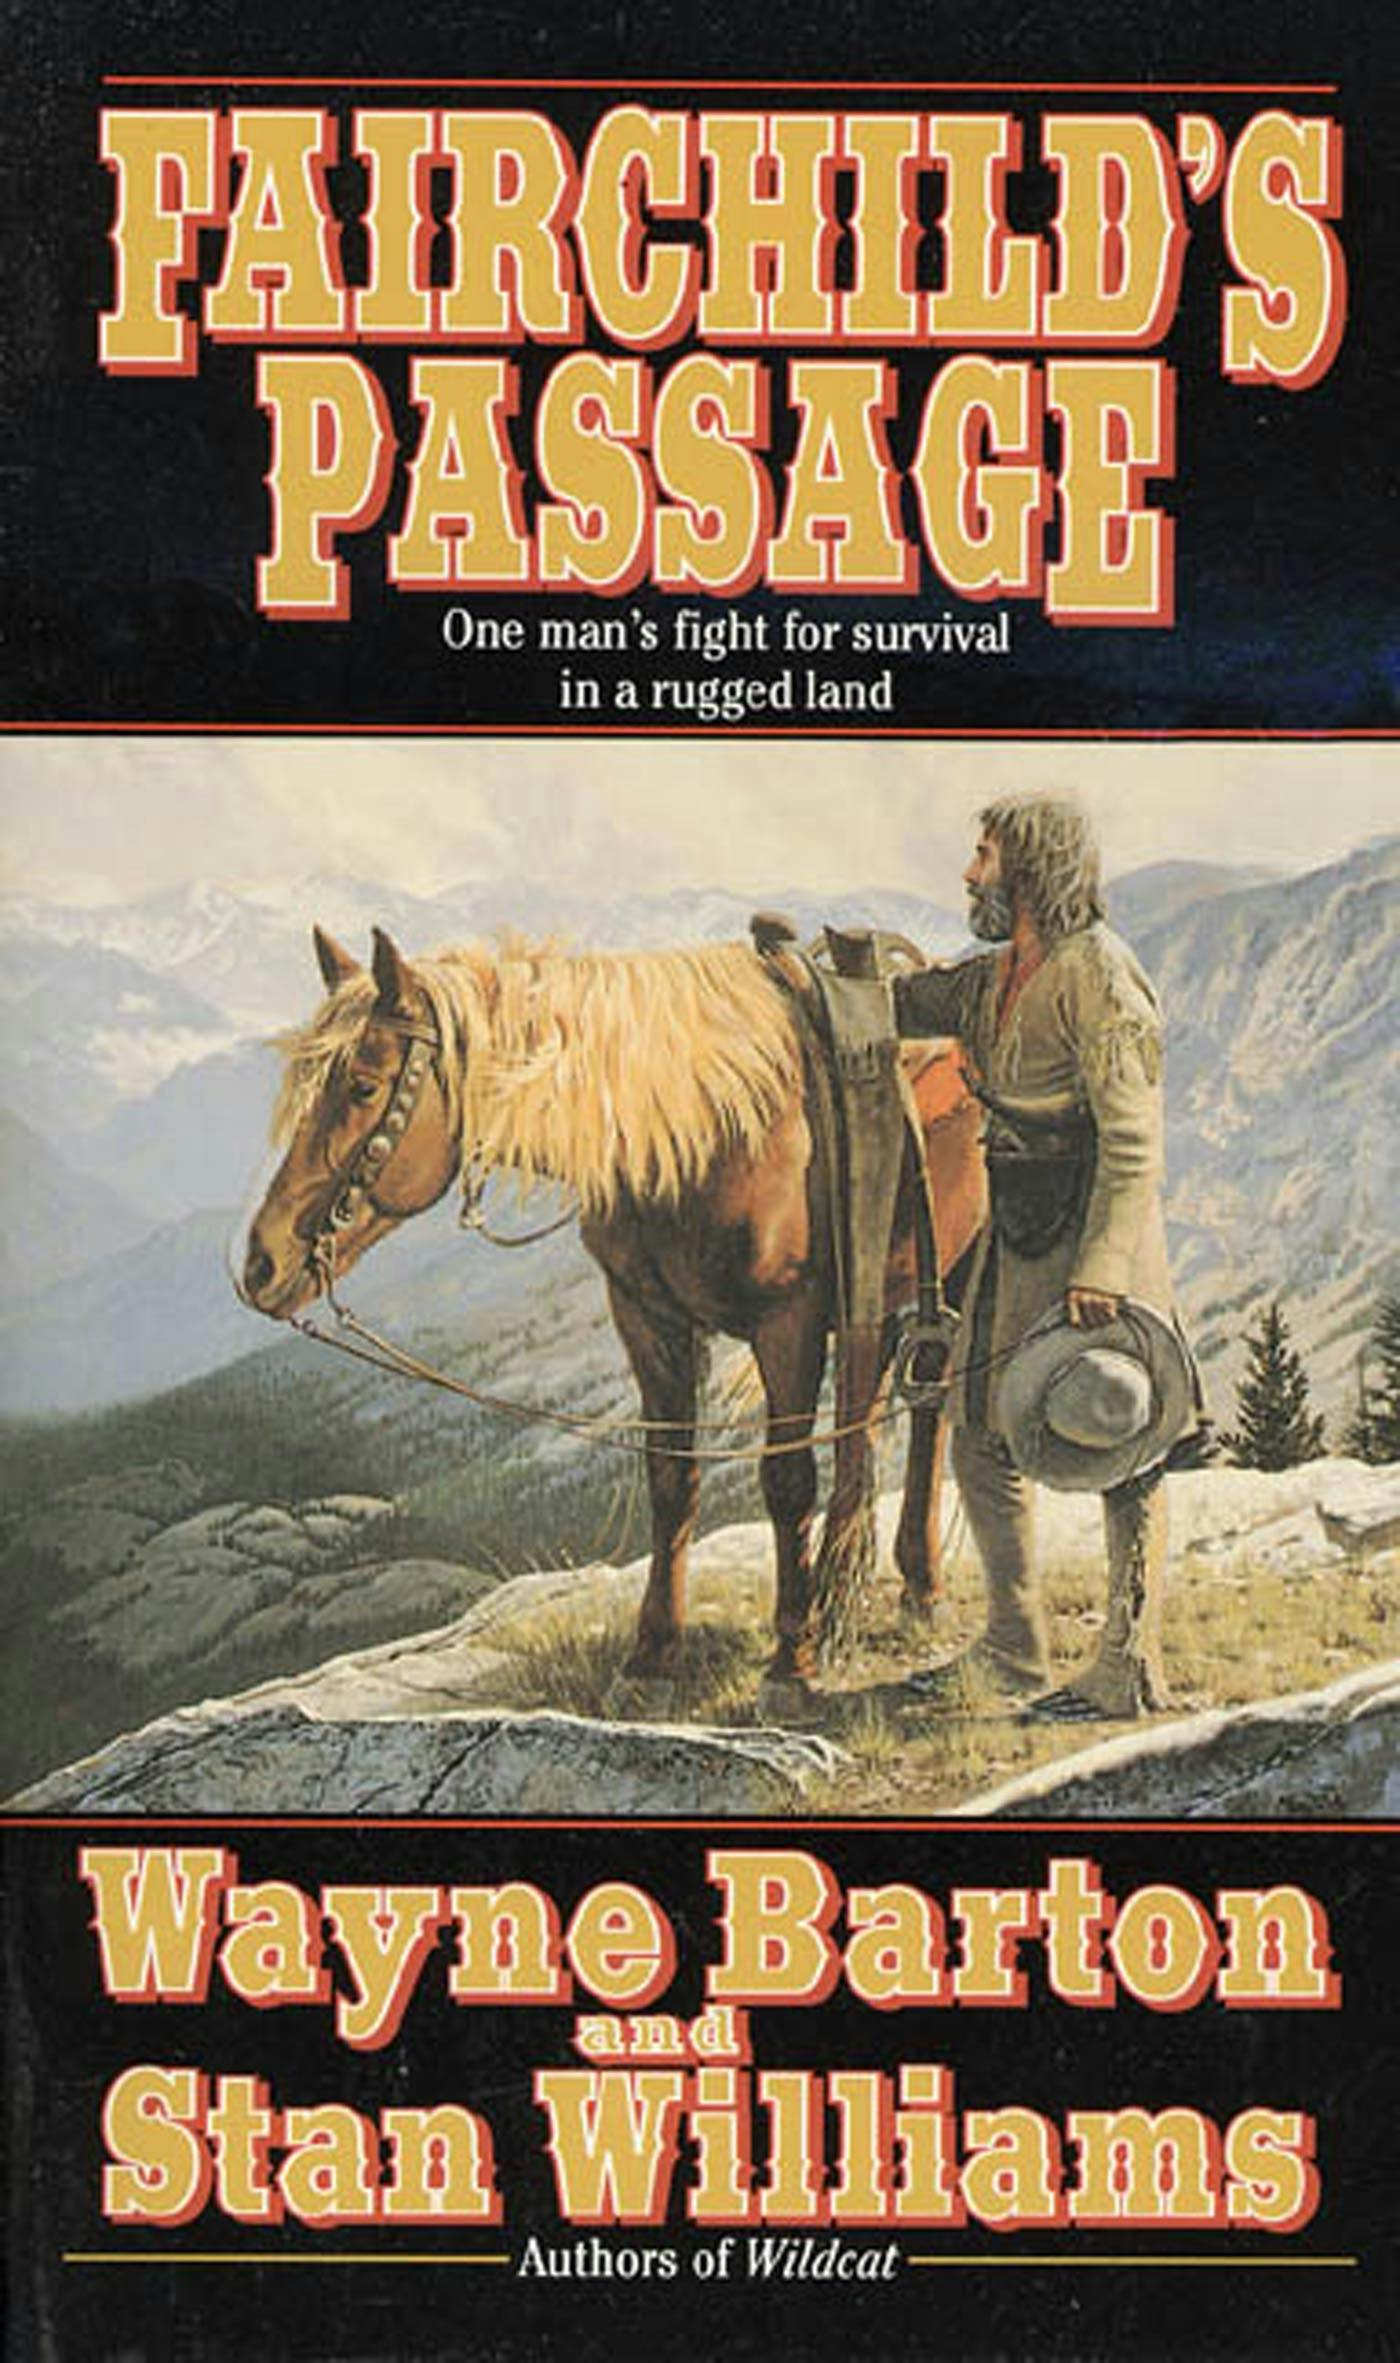 Cover for the book titled as: Fairchild's Passage